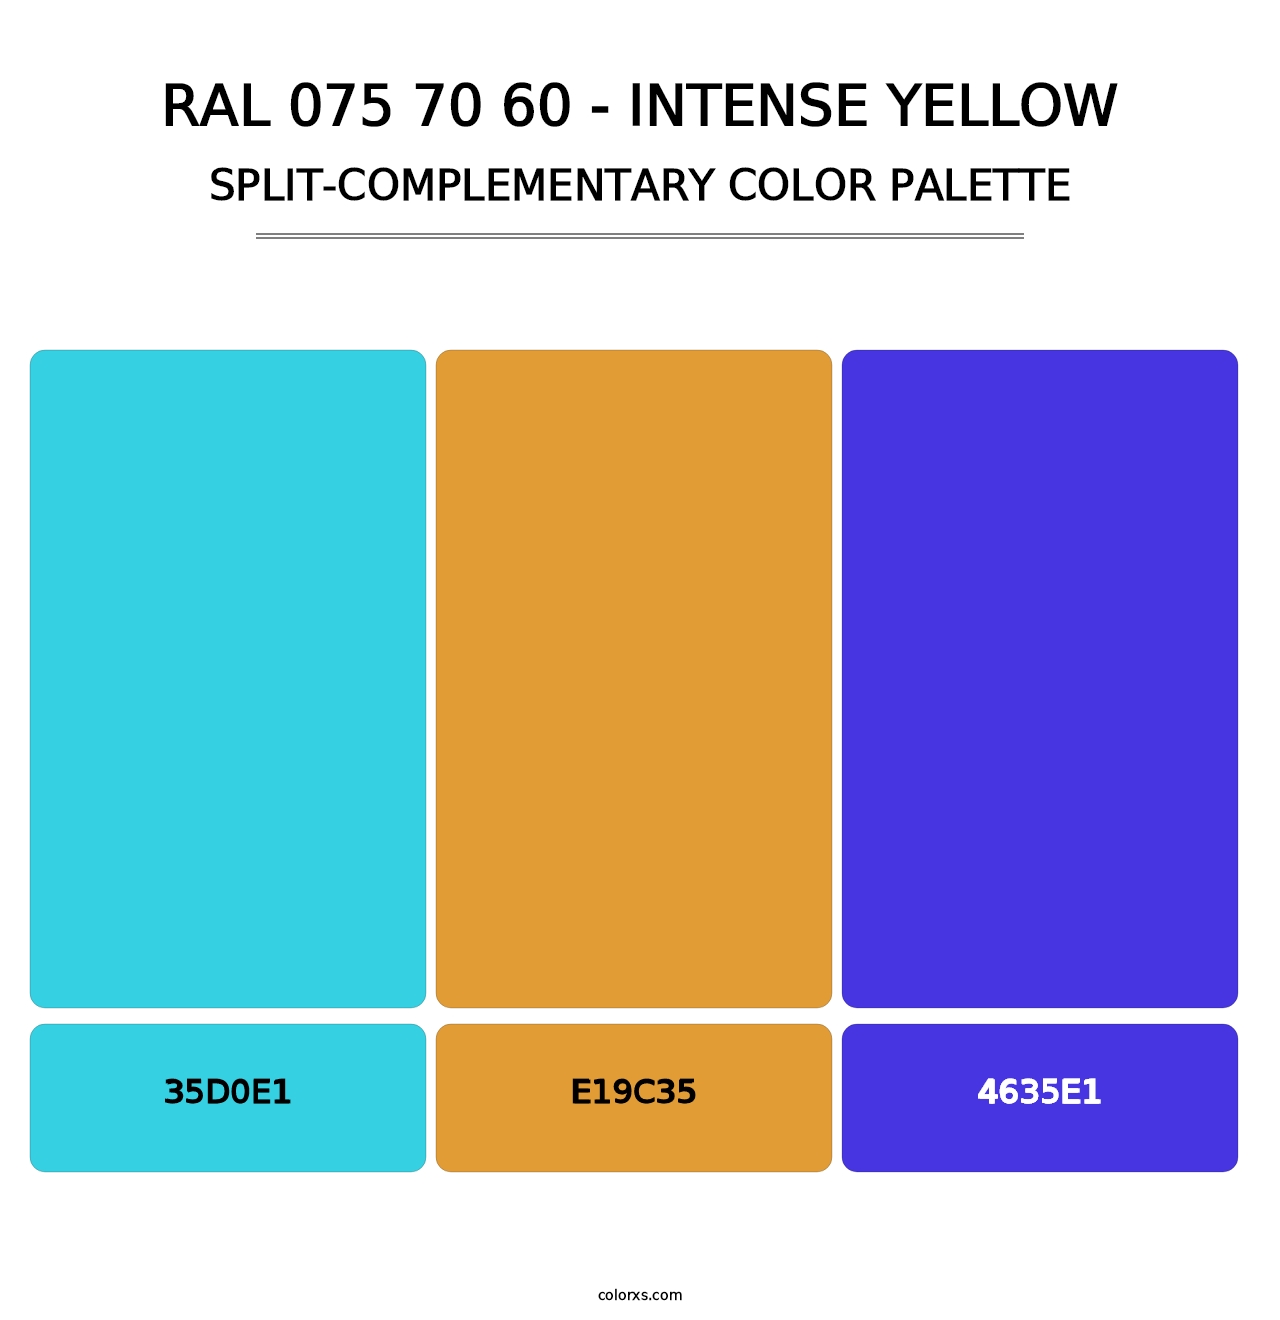 RAL 075 70 60 - Intense Yellow - Split-Complementary Color Palette